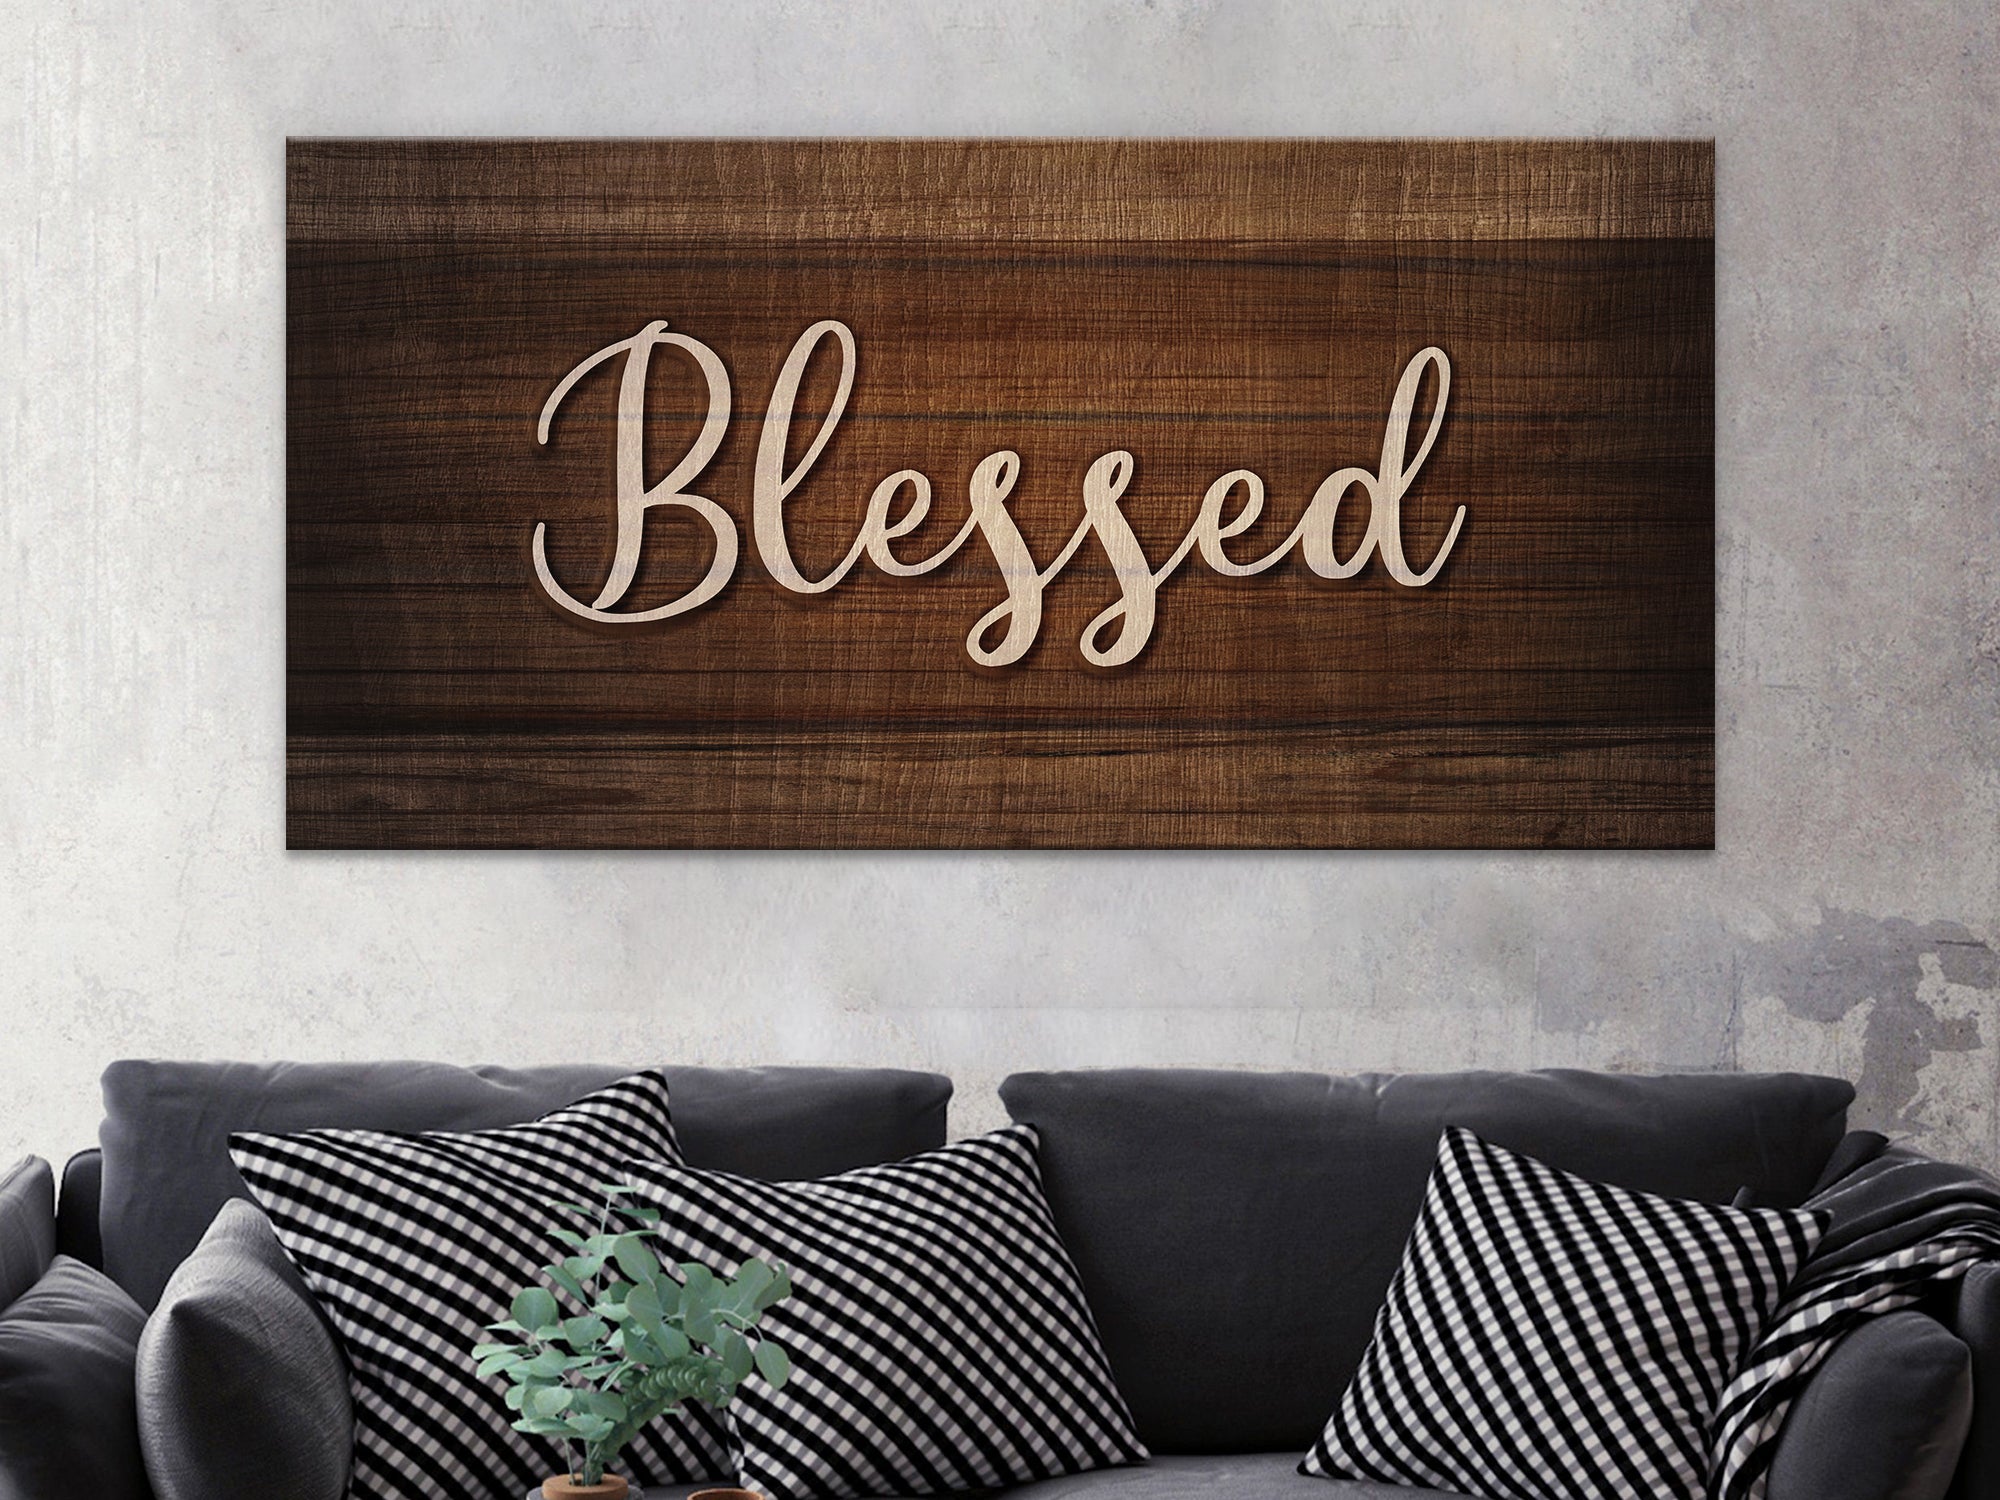 Christian Wall Art Blessed Canvas Wall Art